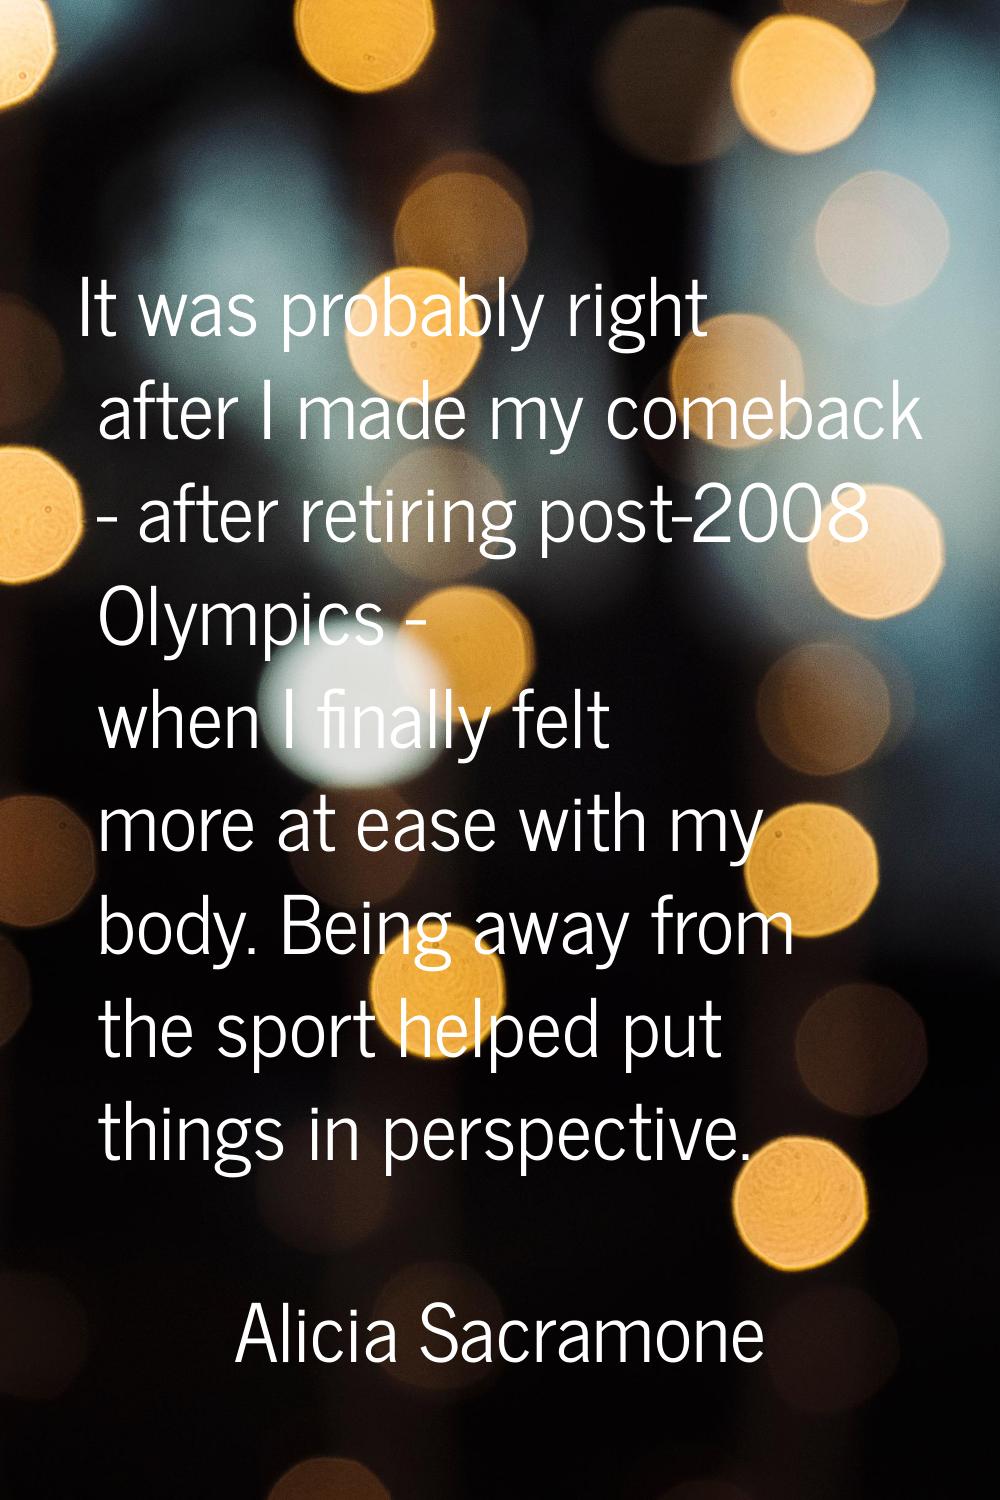 It was probably right after I made my comeback - after retiring post-2008 Olympics - when I finally